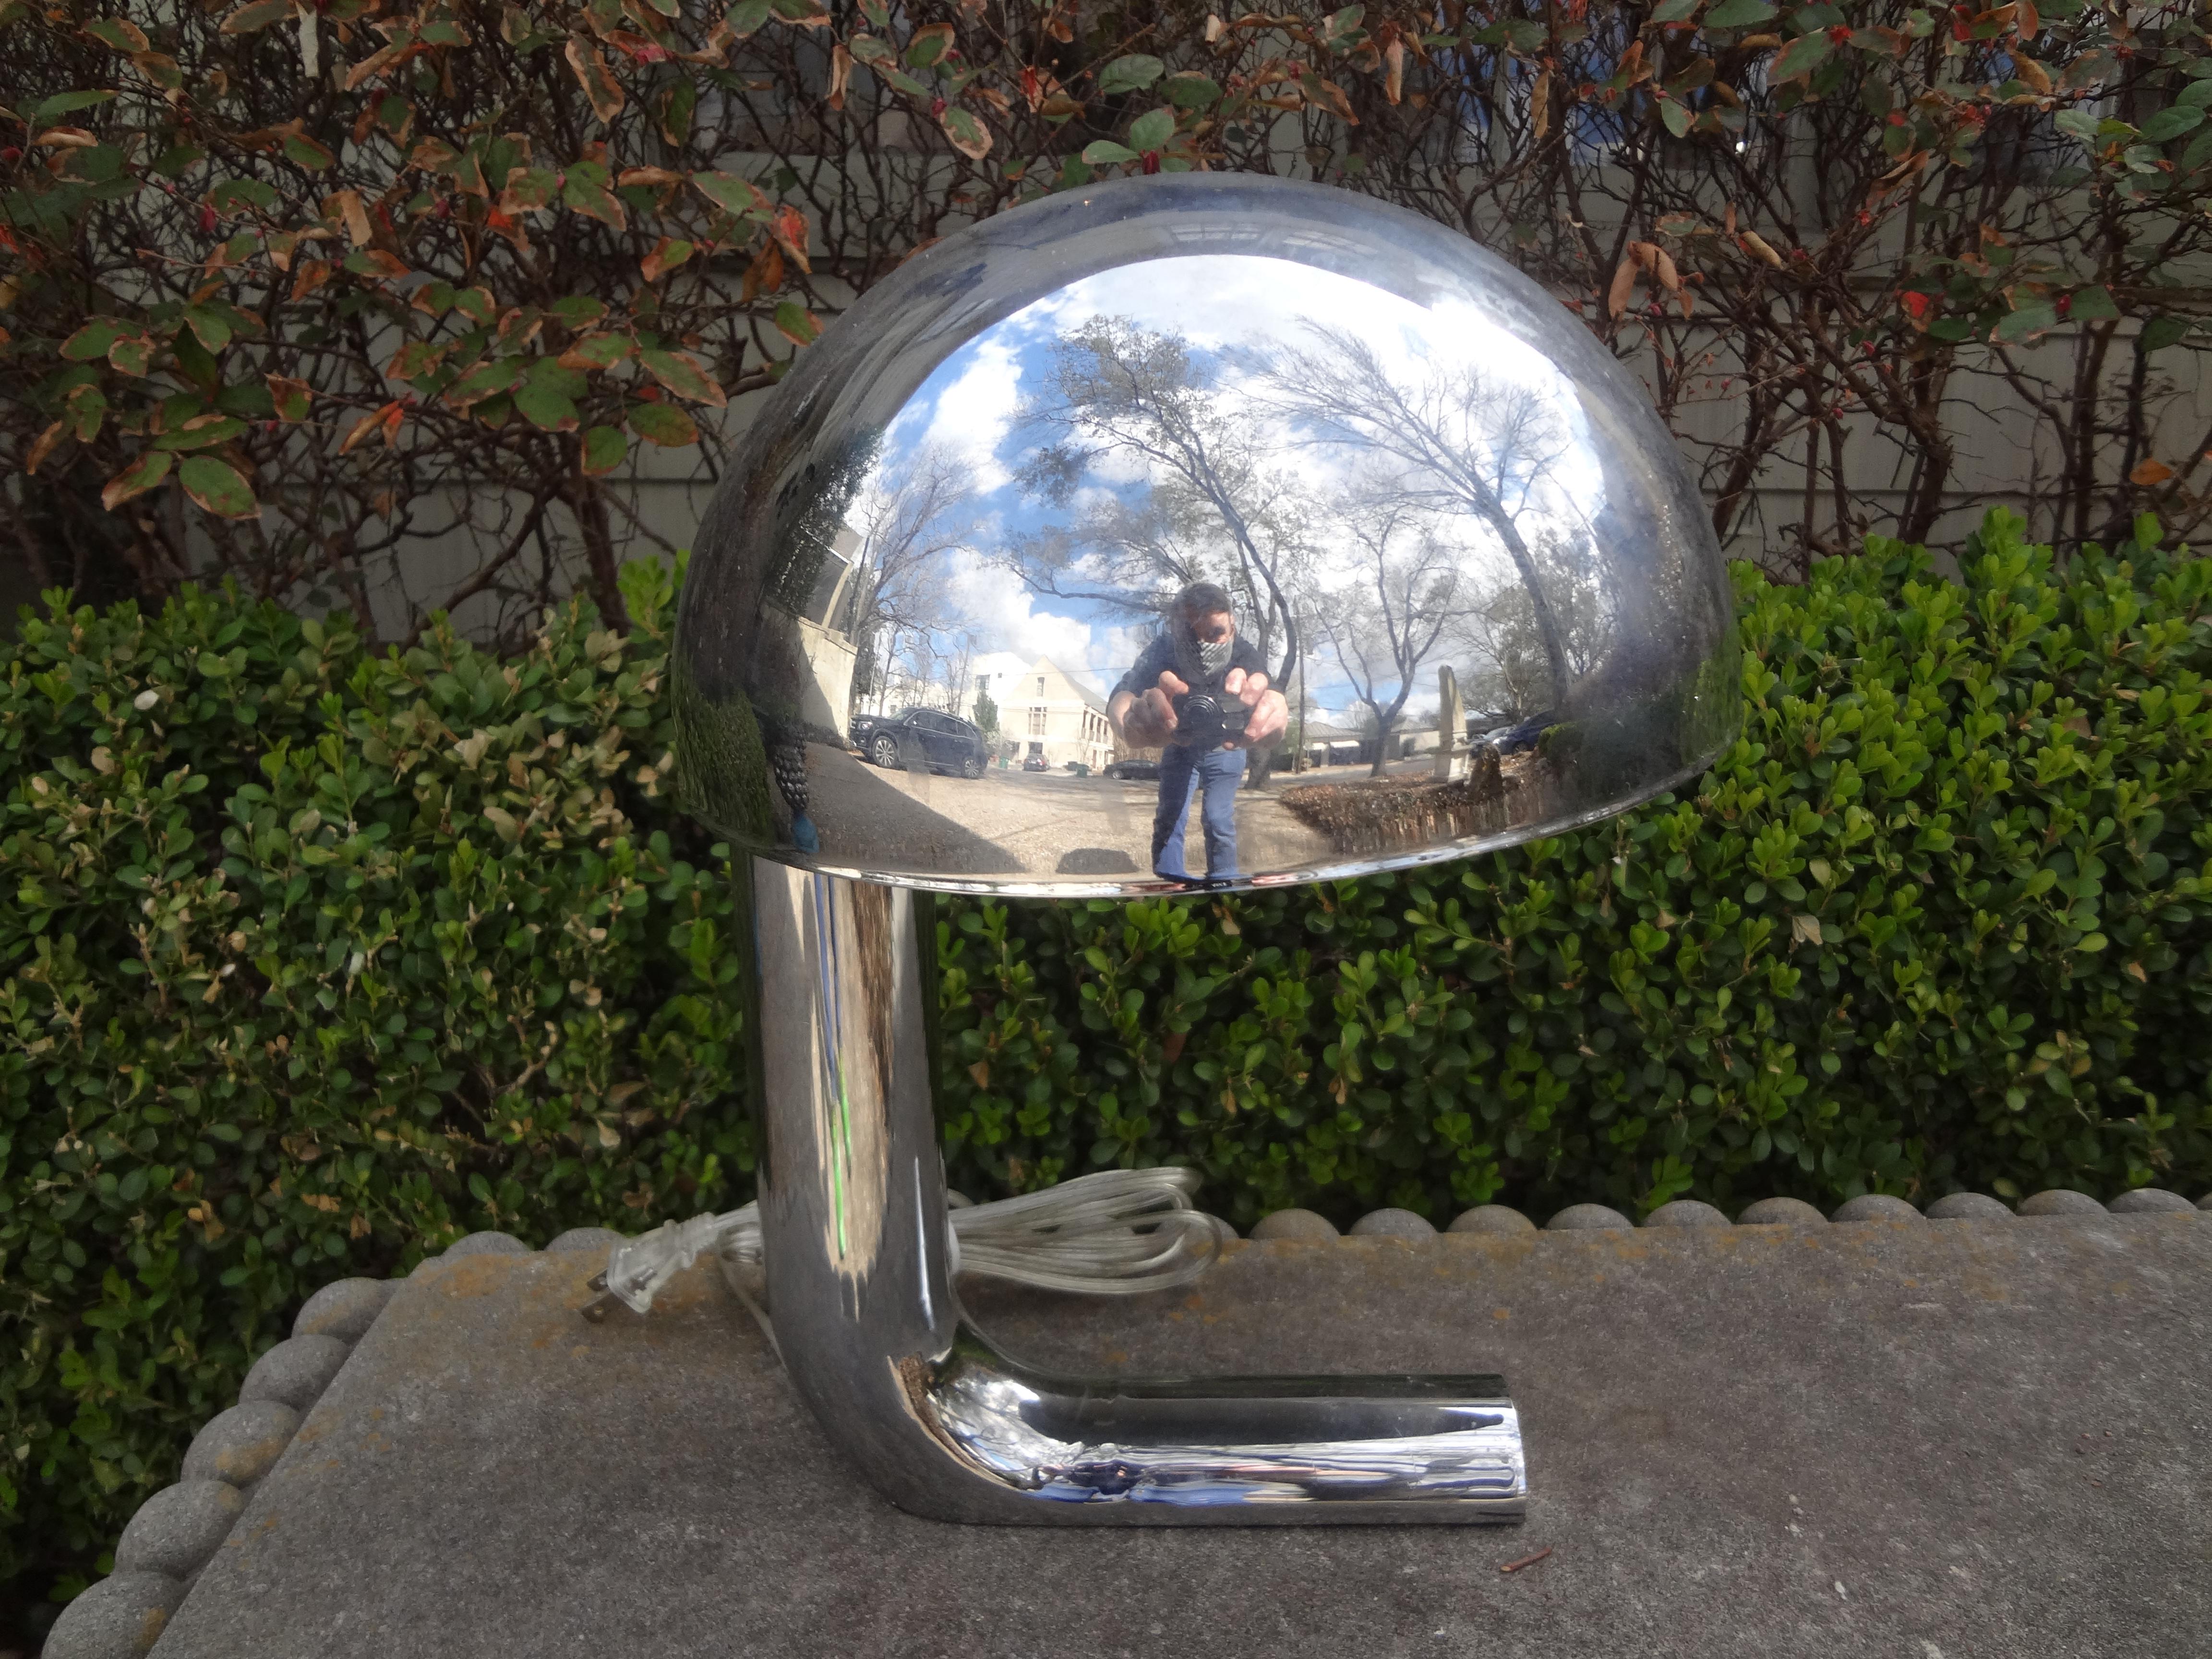 Mid-Century Modern Sarfatti for Arteluce style chrome desk lamp.
Unusual Mid-Century Modern chrome mushroom desk lamp in the manner of Sarfatti for Arteluce. This stylish chrome desk lamp is most likely Italian in origin. It has been newly wired to